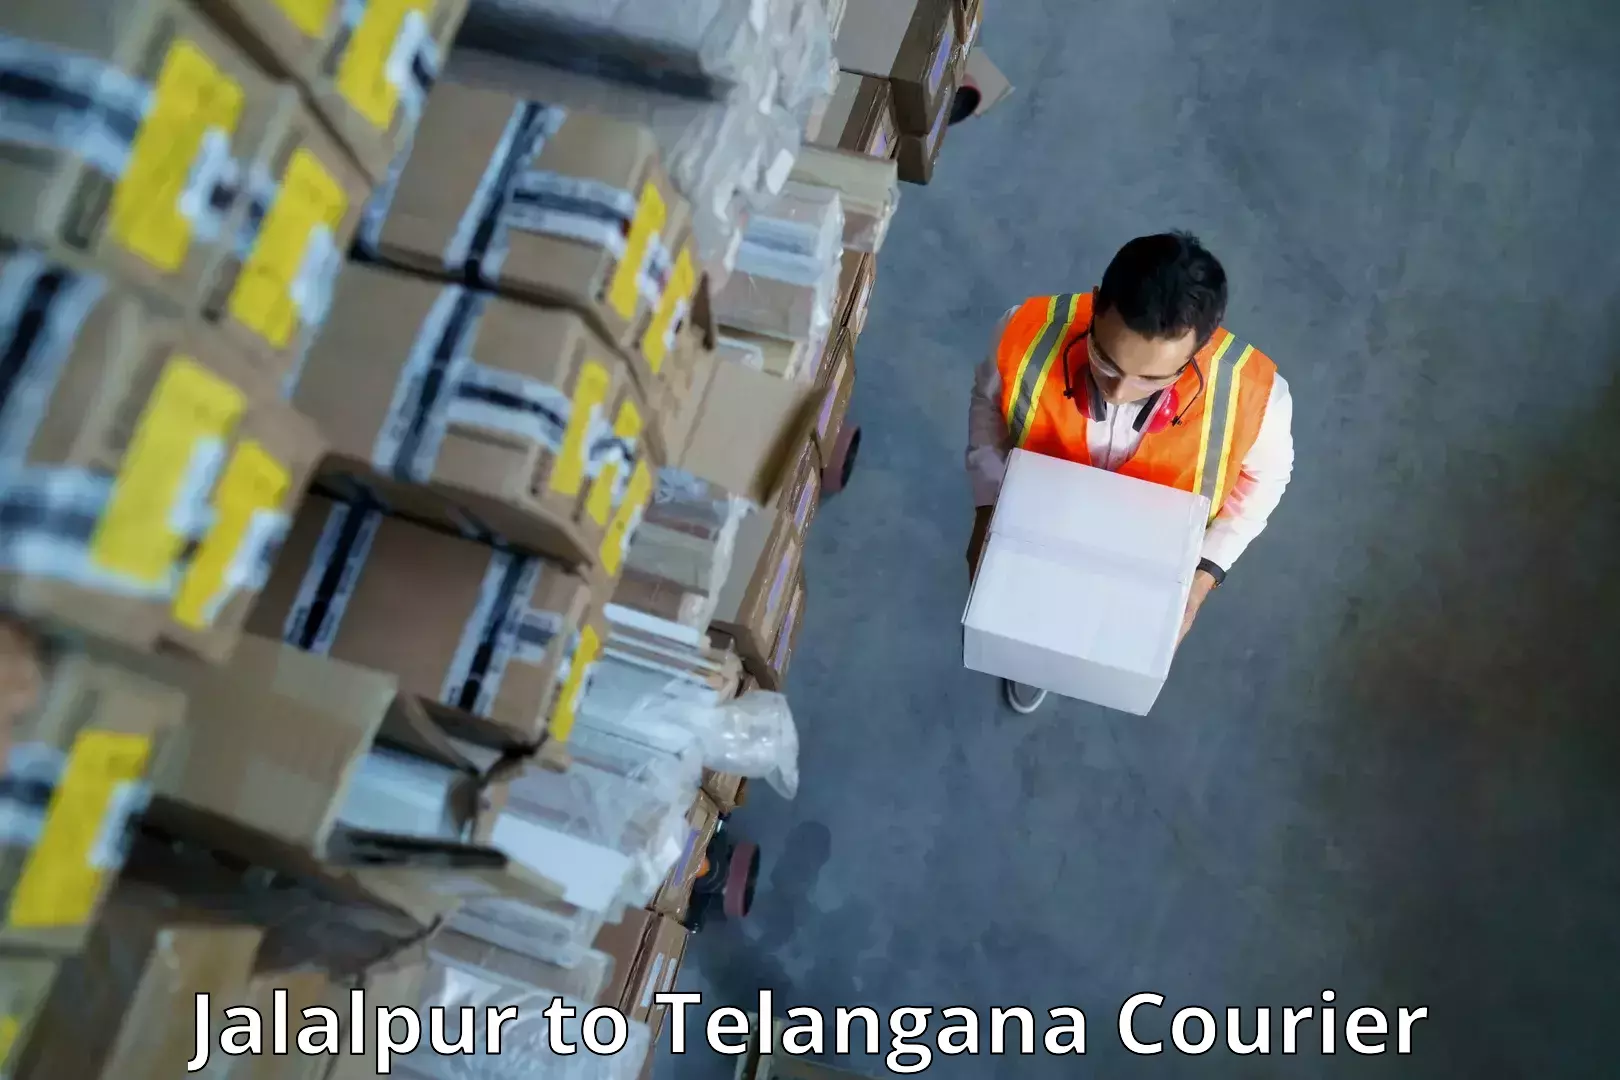 Reliable courier service Jalalpur to Bhadrachalam